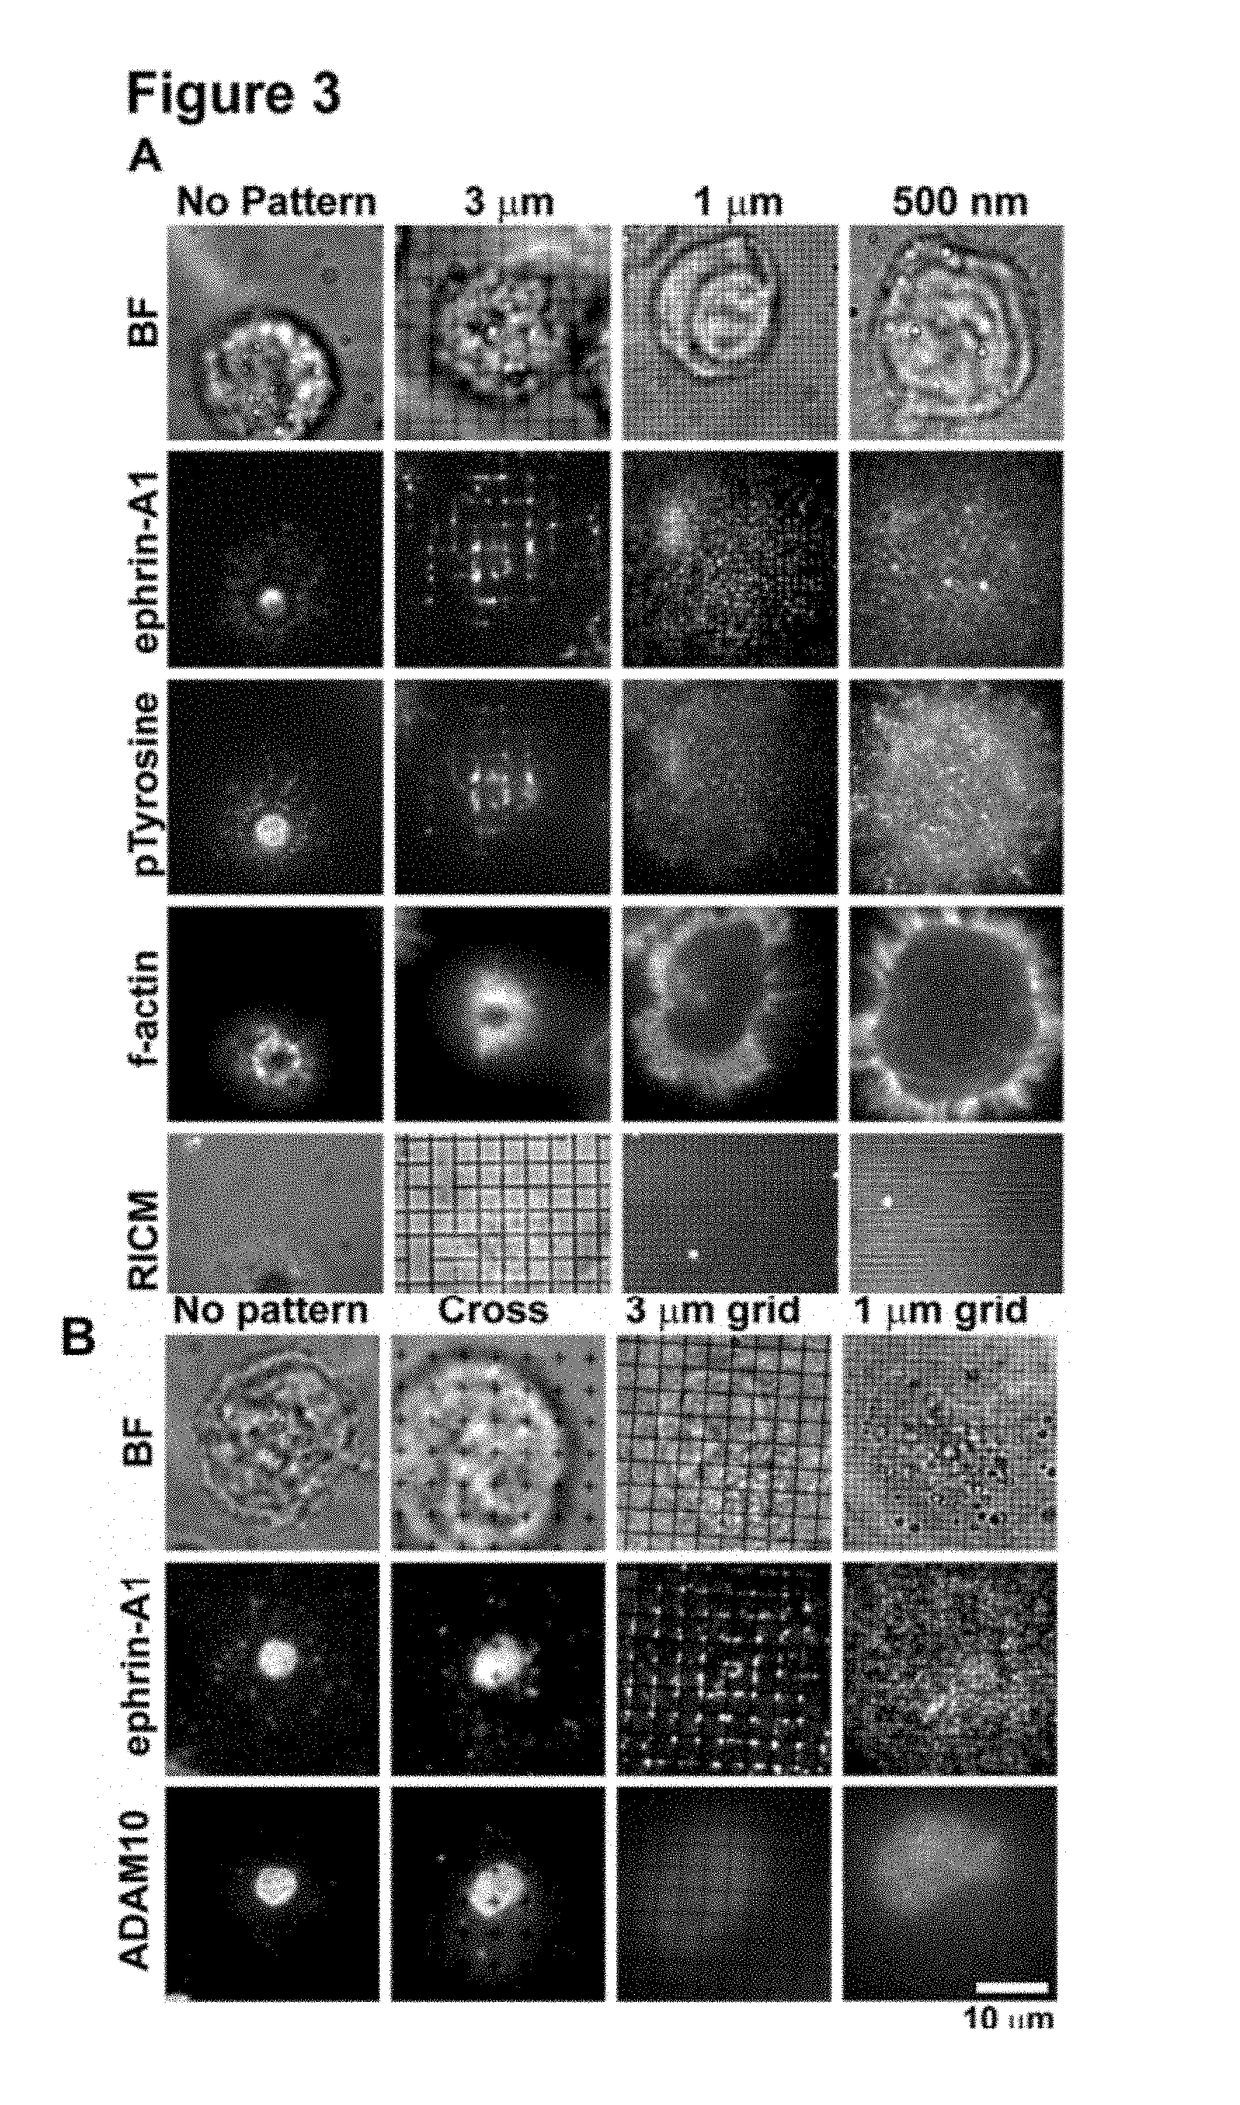 Spatial biomarker of disease and detection of spatial organization of cellular receptors